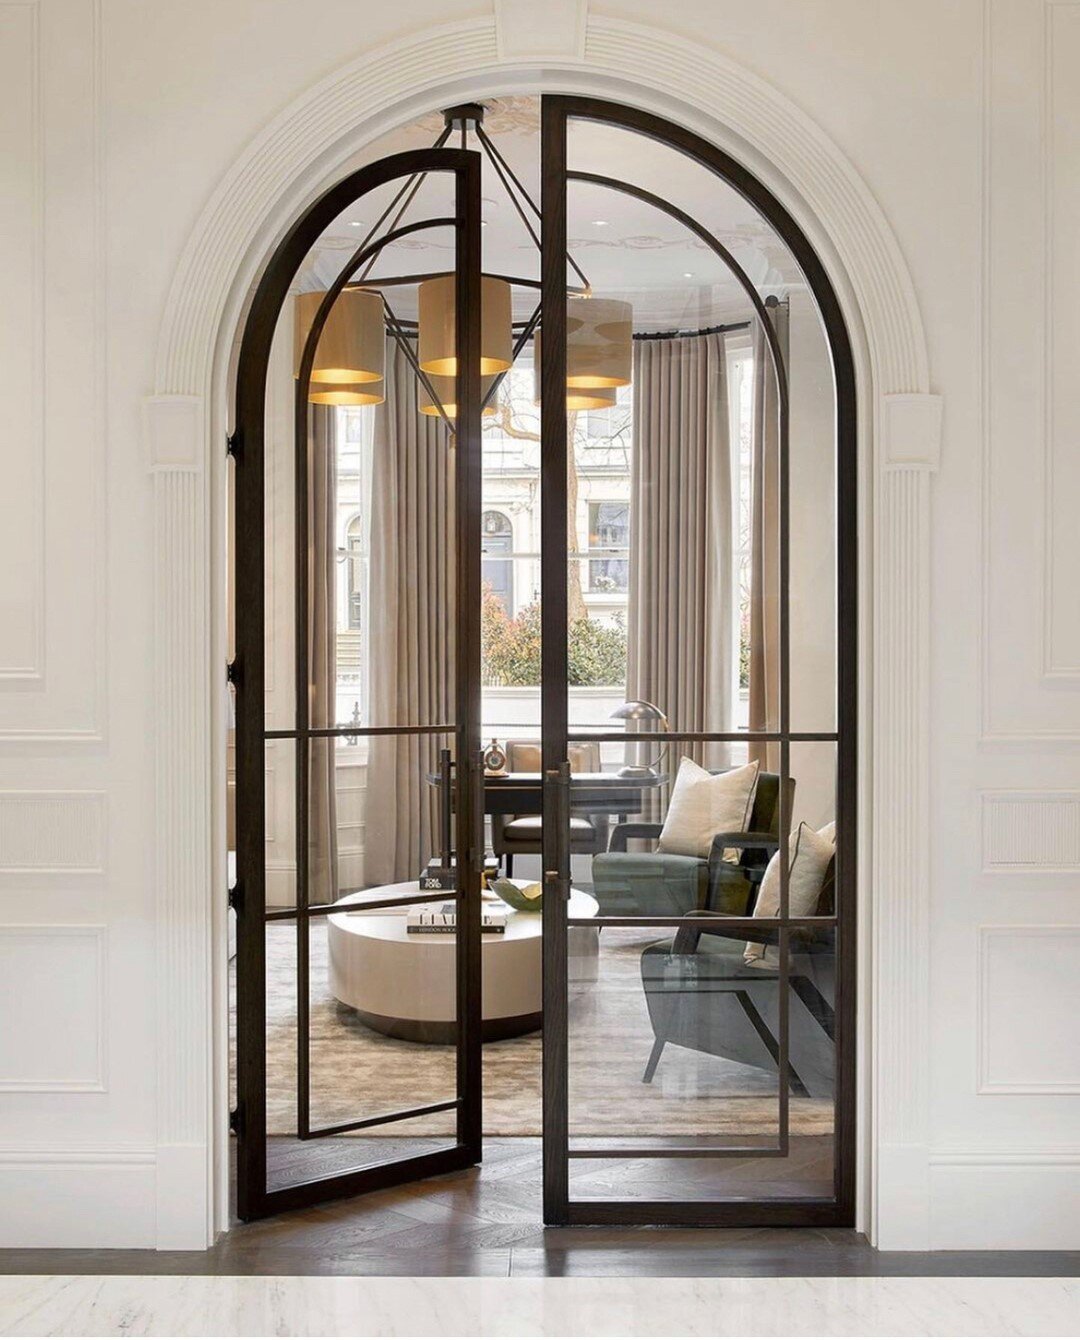 BE *STEEL* MY 🖤⠀⠀⠀⠀⠀⠀⠀⠀⠀⠀
STEEL DOORS are one of my true loves as they add dimension, interest and depth. ⠀⠀⠀⠀⠀⠀⠀⠀⠀
⠀⠀⠀⠀⠀⠀⠀⠀⠀
However, their price tag can often kill a budget. Alas, you can always paint the window MULLIONS (grids on the glass) black